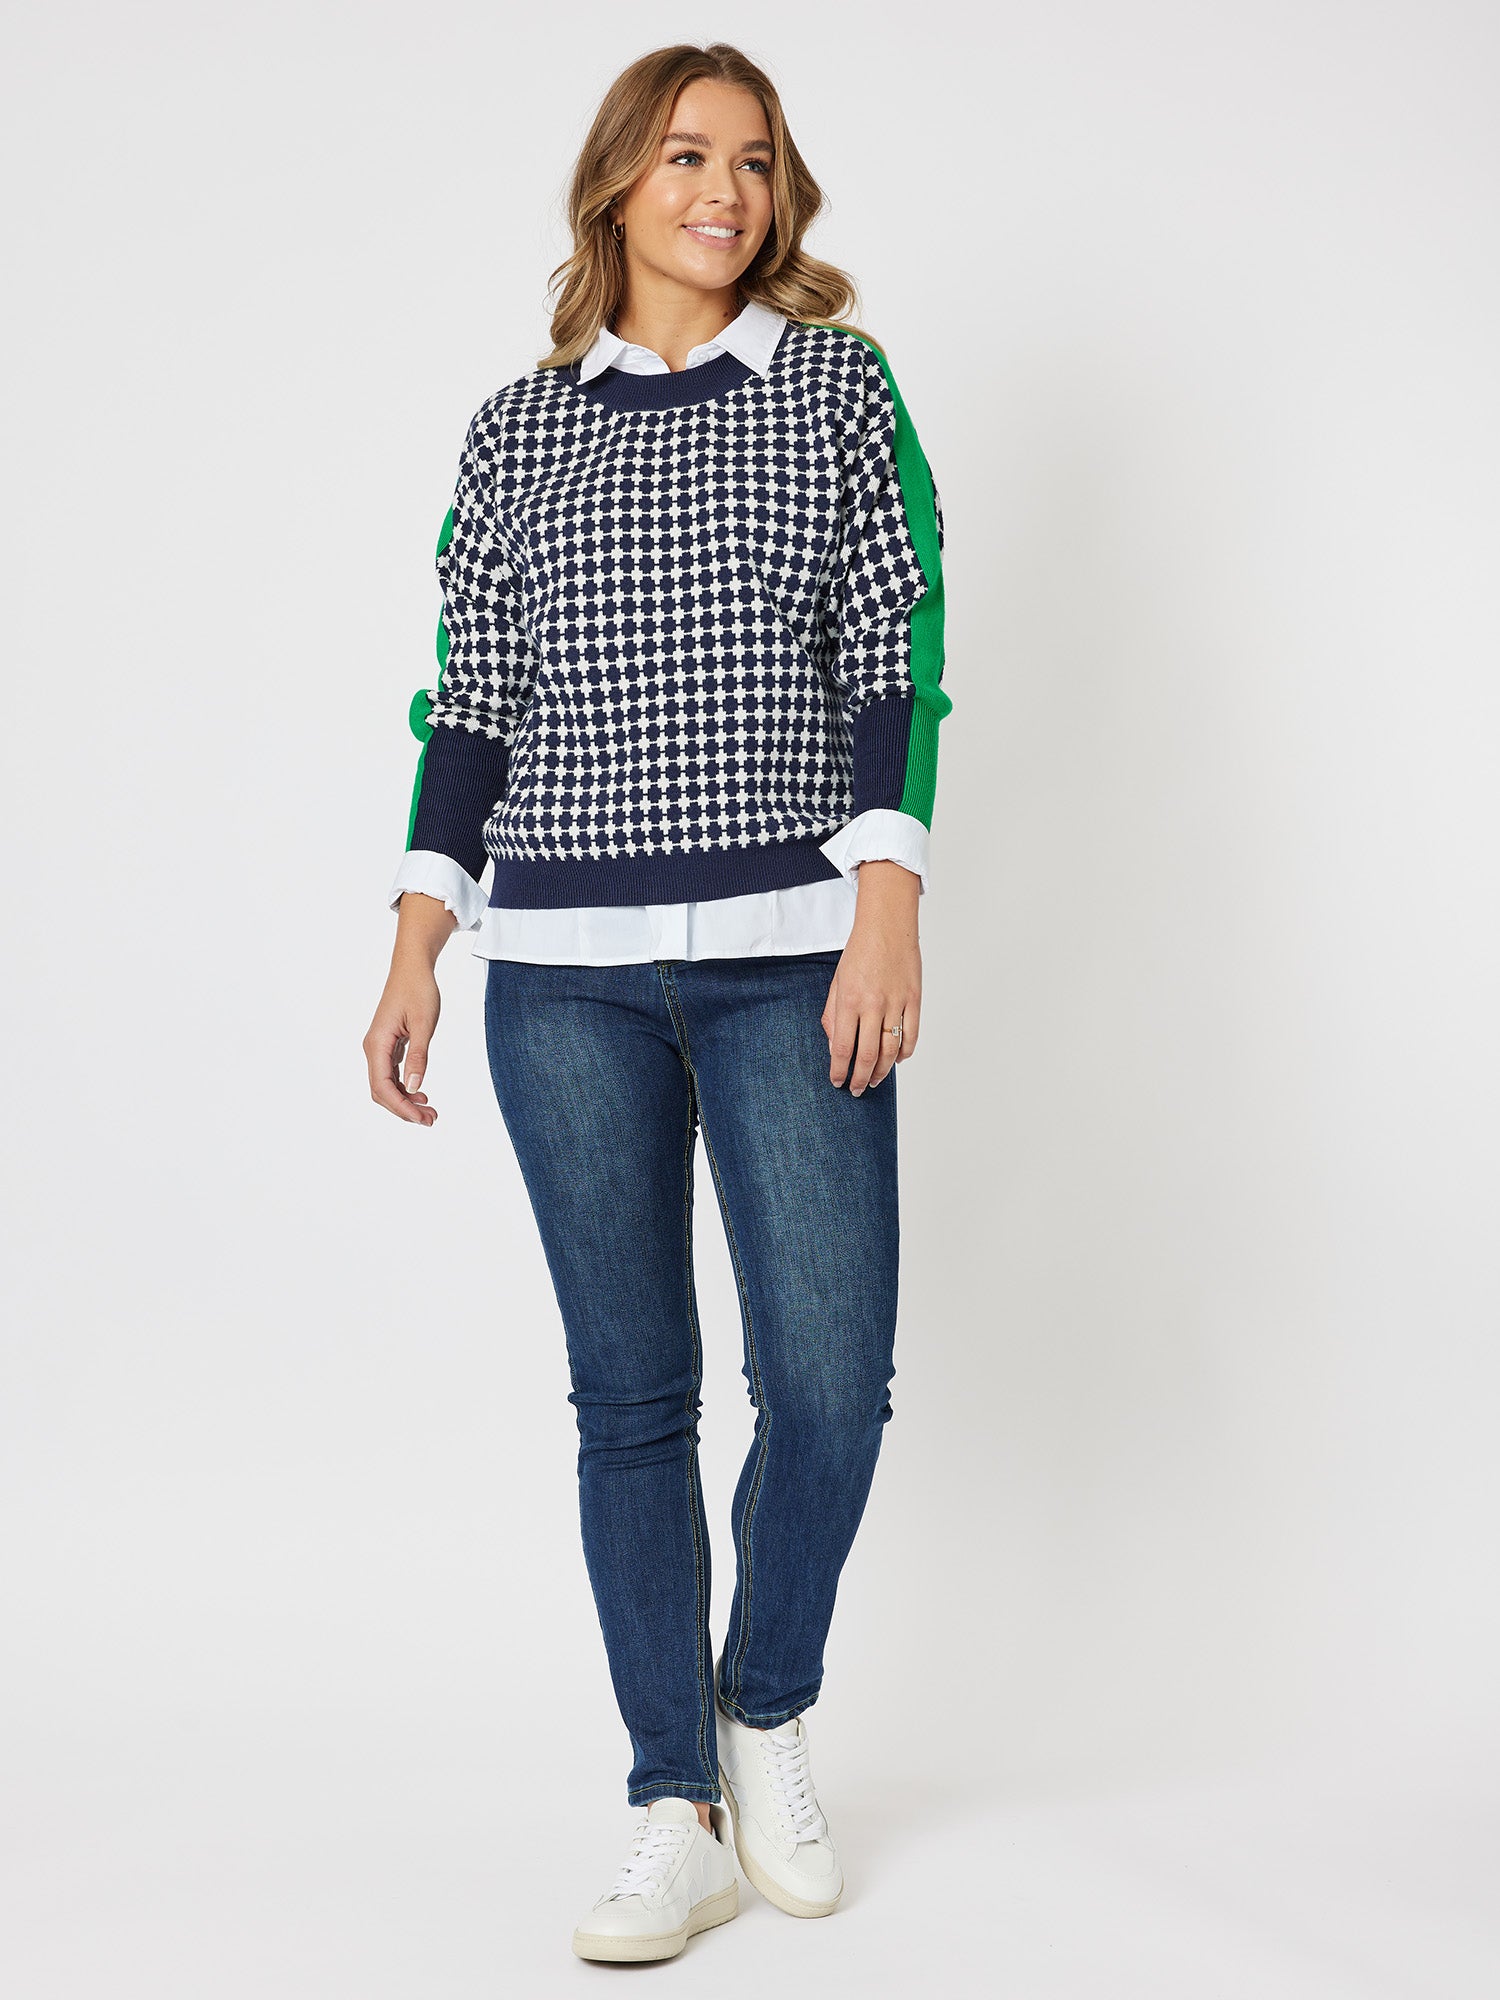 Hope Contrast Knit Top - Navy/Green